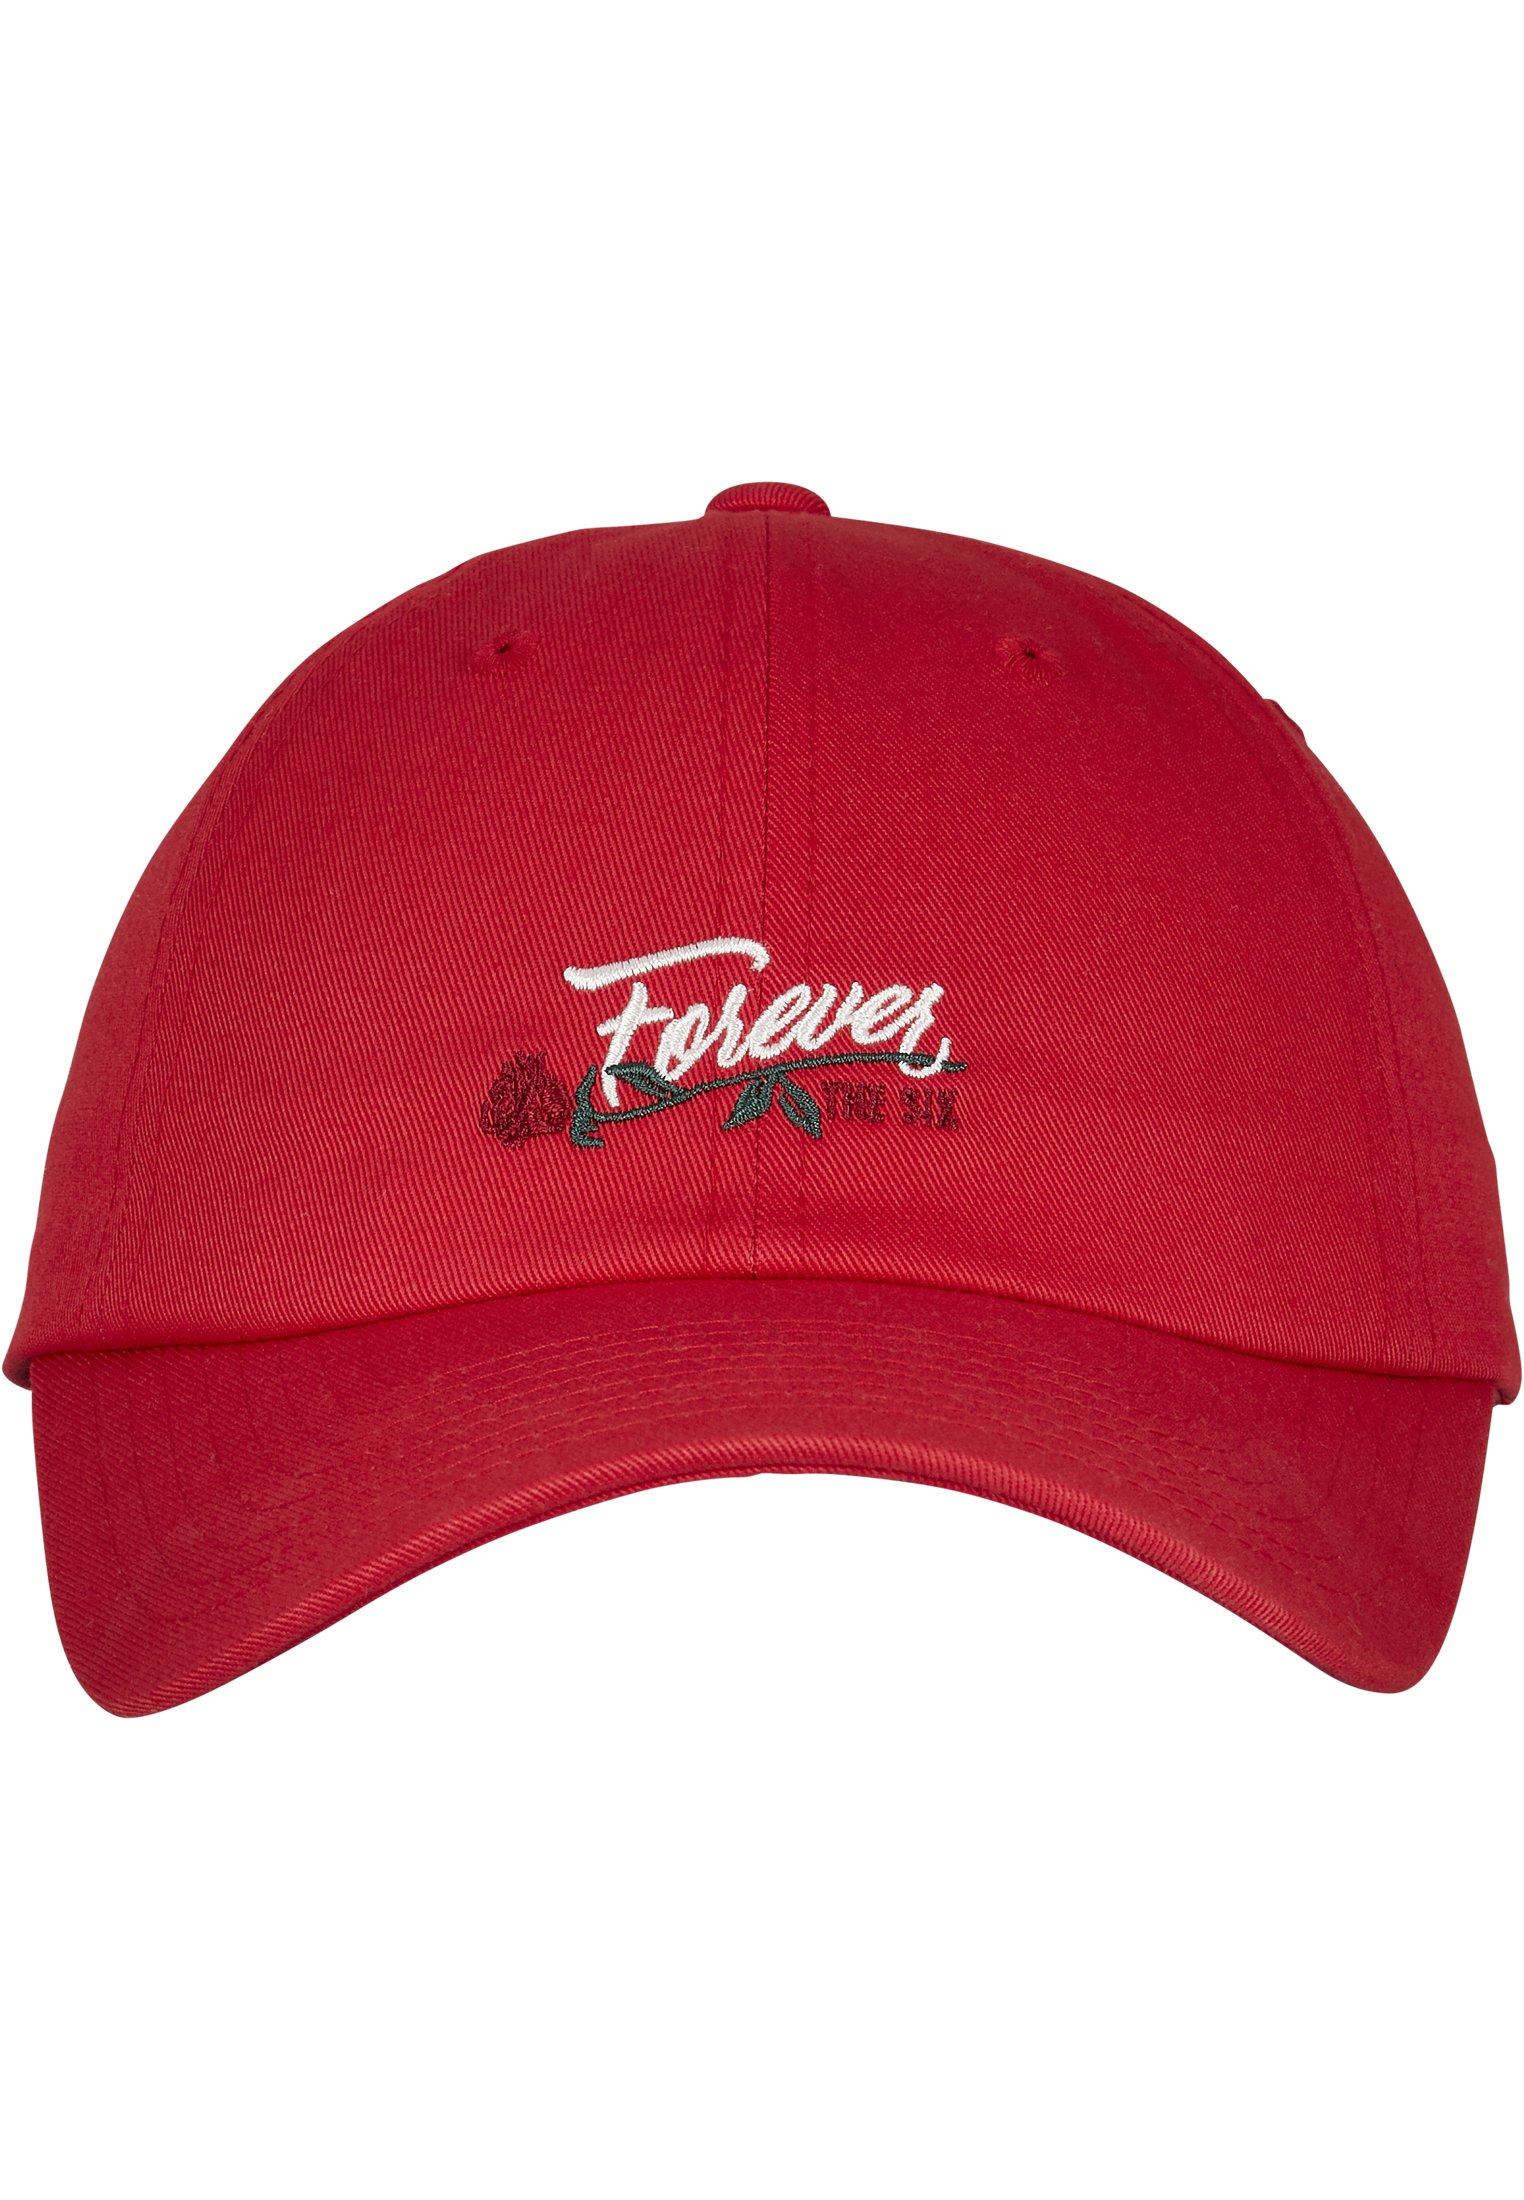 C&S WL Six Forever Curved Cap red/mc one size